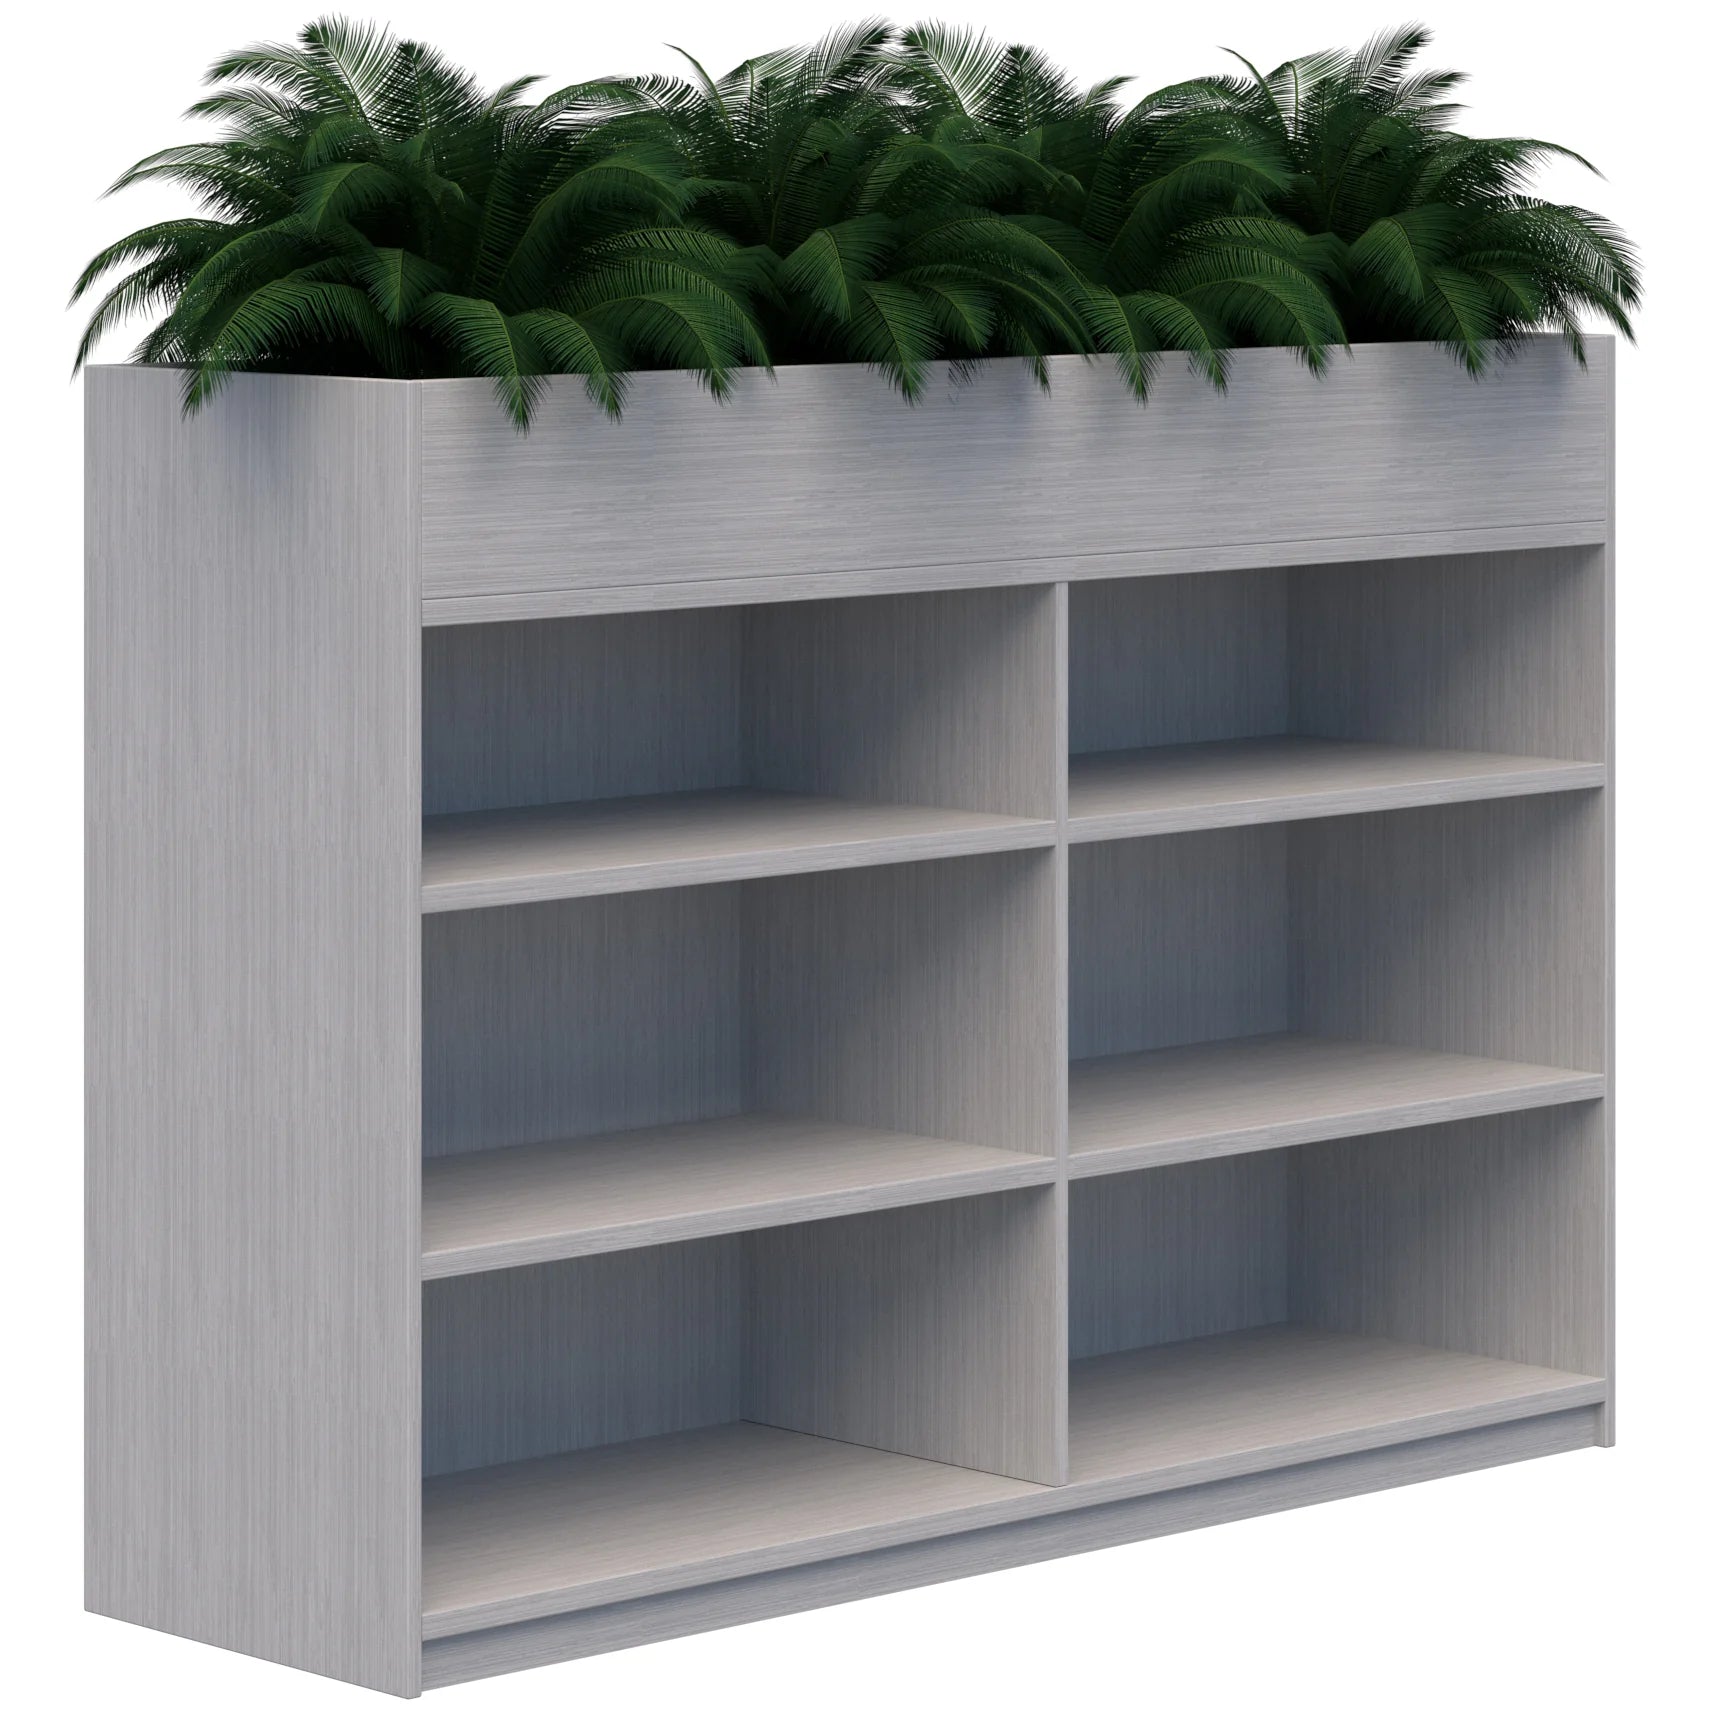 Dual three tier bookcase with built in planter box on top in silver strata colour.